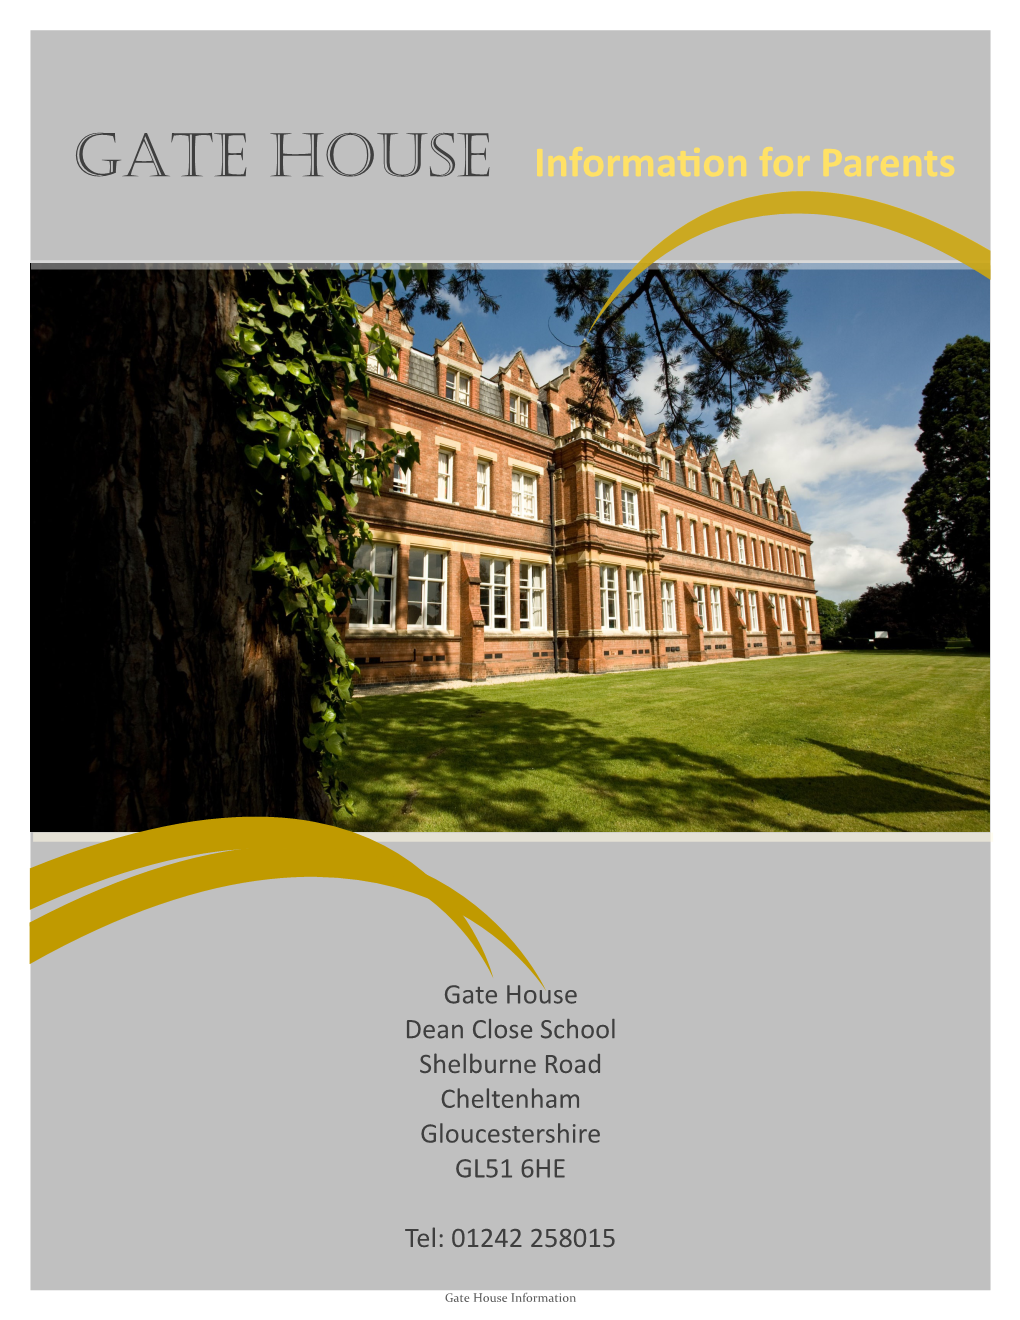 GATE HOUSE Information for Parents